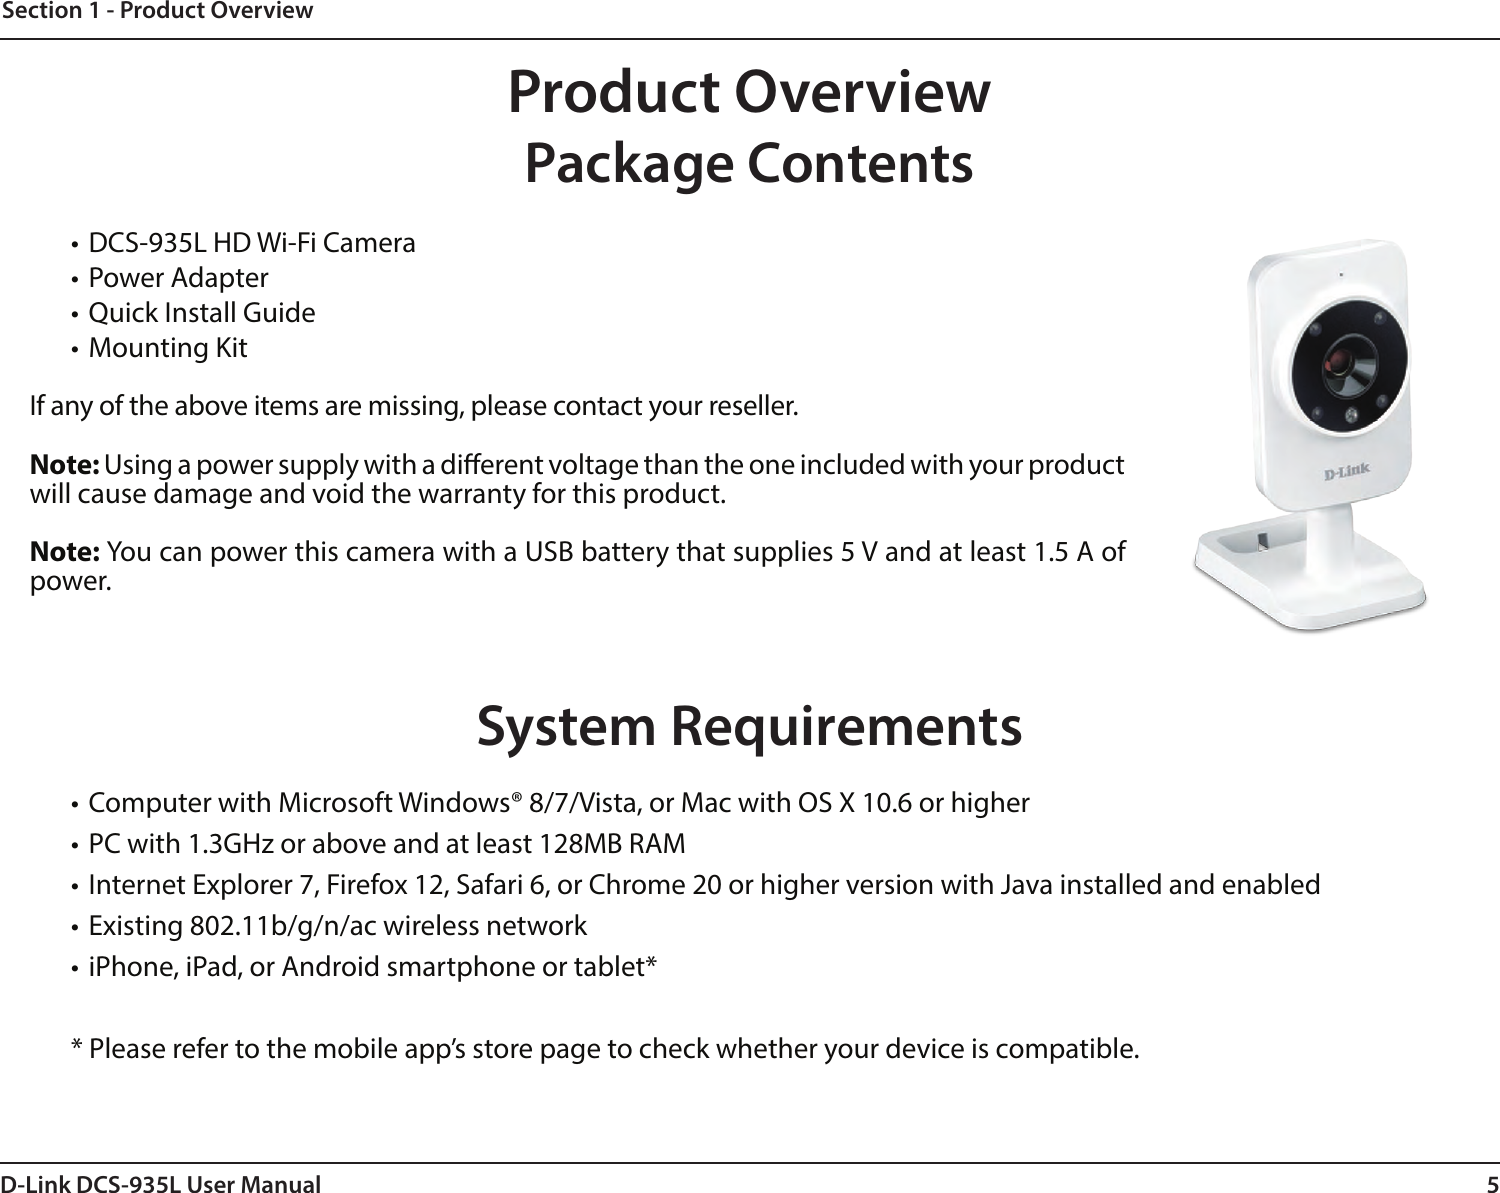 5D-Link DCS-935L User ManualSection 1 - Product Overview• DCS-935L HD Wi-Fi Camera• Power Adapter• Quick Install Guide• Mounting KitIf any of the above items are missing, please contact your reseller.Note: Using a power supply with a dierent voltage than the one included with your product will cause damage and void the warranty for this product.Note: You can power this camera with a USB battery that supplies 5 V and at least 1.5 A of power.System Requirements• Computer with Microsoft Windows® 8/7/Vista, or Mac with OS X 10.6 or higher• PC with 1.3GHz or above and at least 128MB RAM• Internet Explorer 7, Firefox 12, Safari 6, or Chrome 20 or higher version with Java installed and enabled• Existing 802.11b/g/n/ac wireless network• iPhone, iPad, or Android smartphone or tablet** Please refer to the mobile app’s store page to check whether your device is compatible.Product OverviewPackage Contents